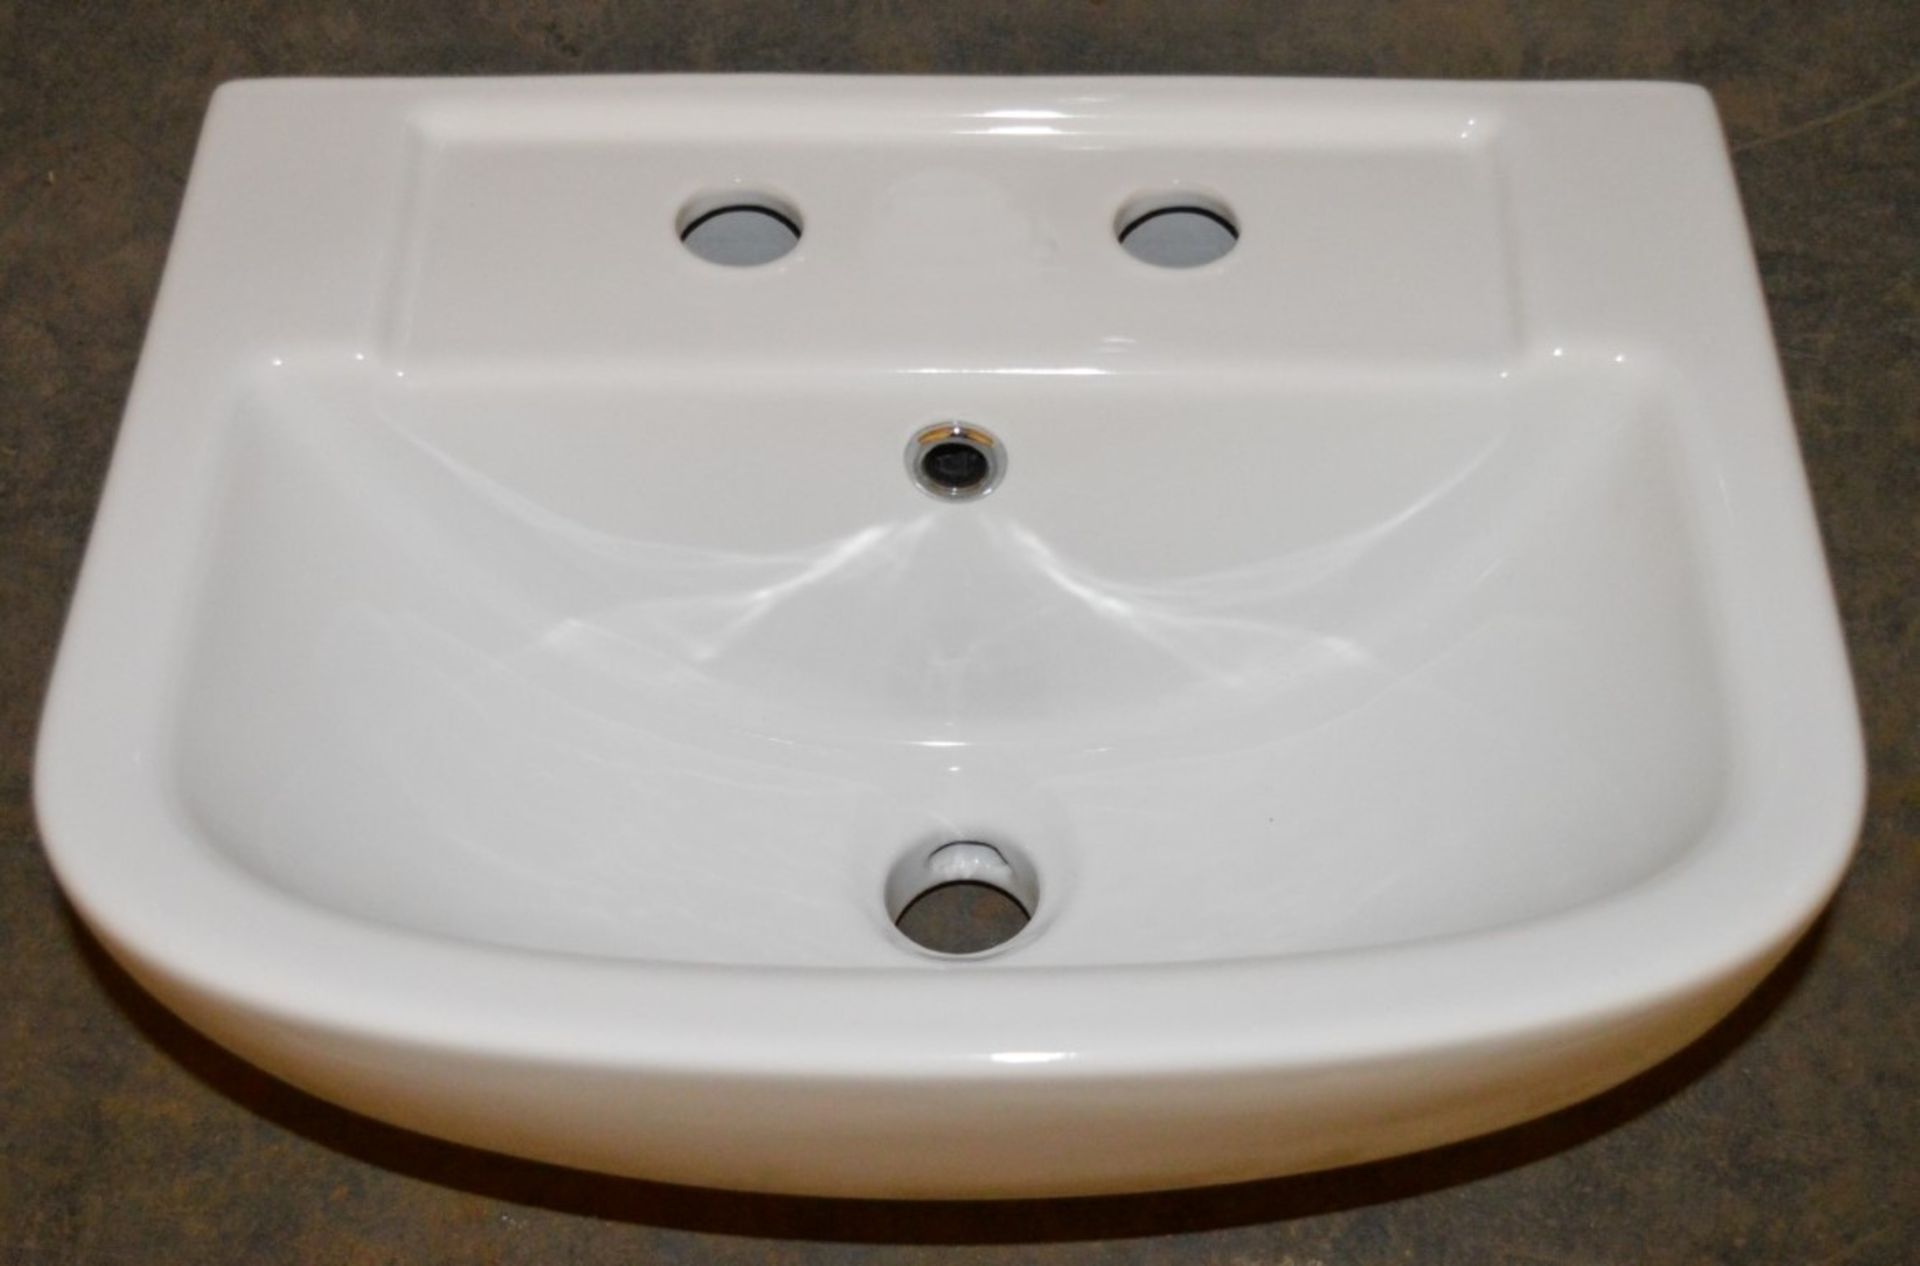 1 x Vogue Bathrooms ZERO Two Tap Hole WALL HUNG SINK BASINS - 450mm Width - Brand New Boxed - Image 2 of 2